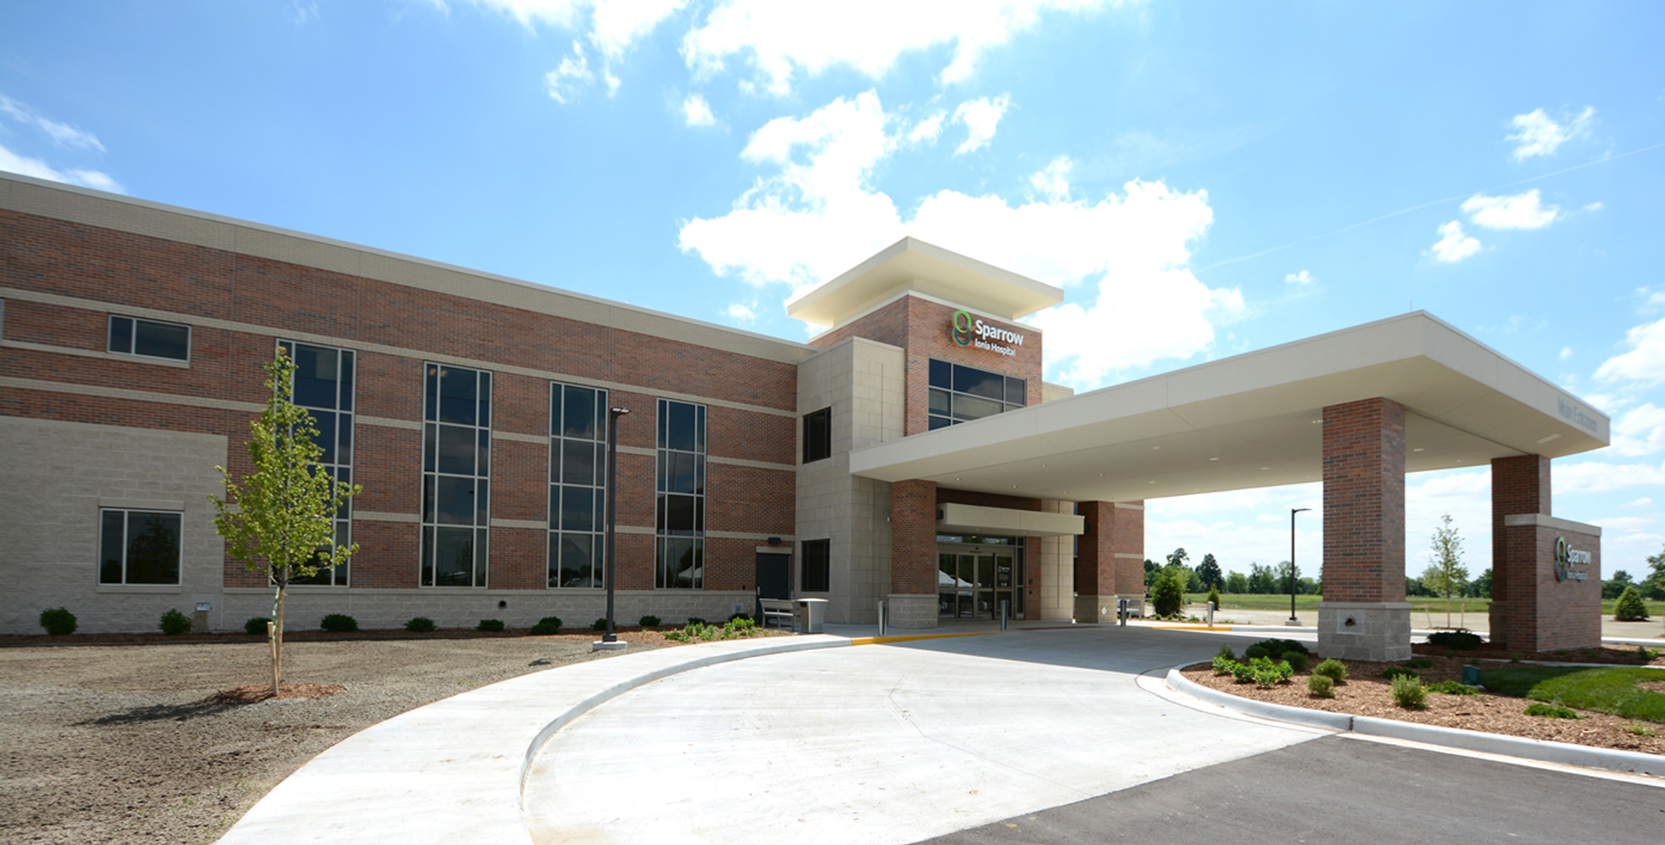 MEP Engineering Design Services for Sparrow Health System